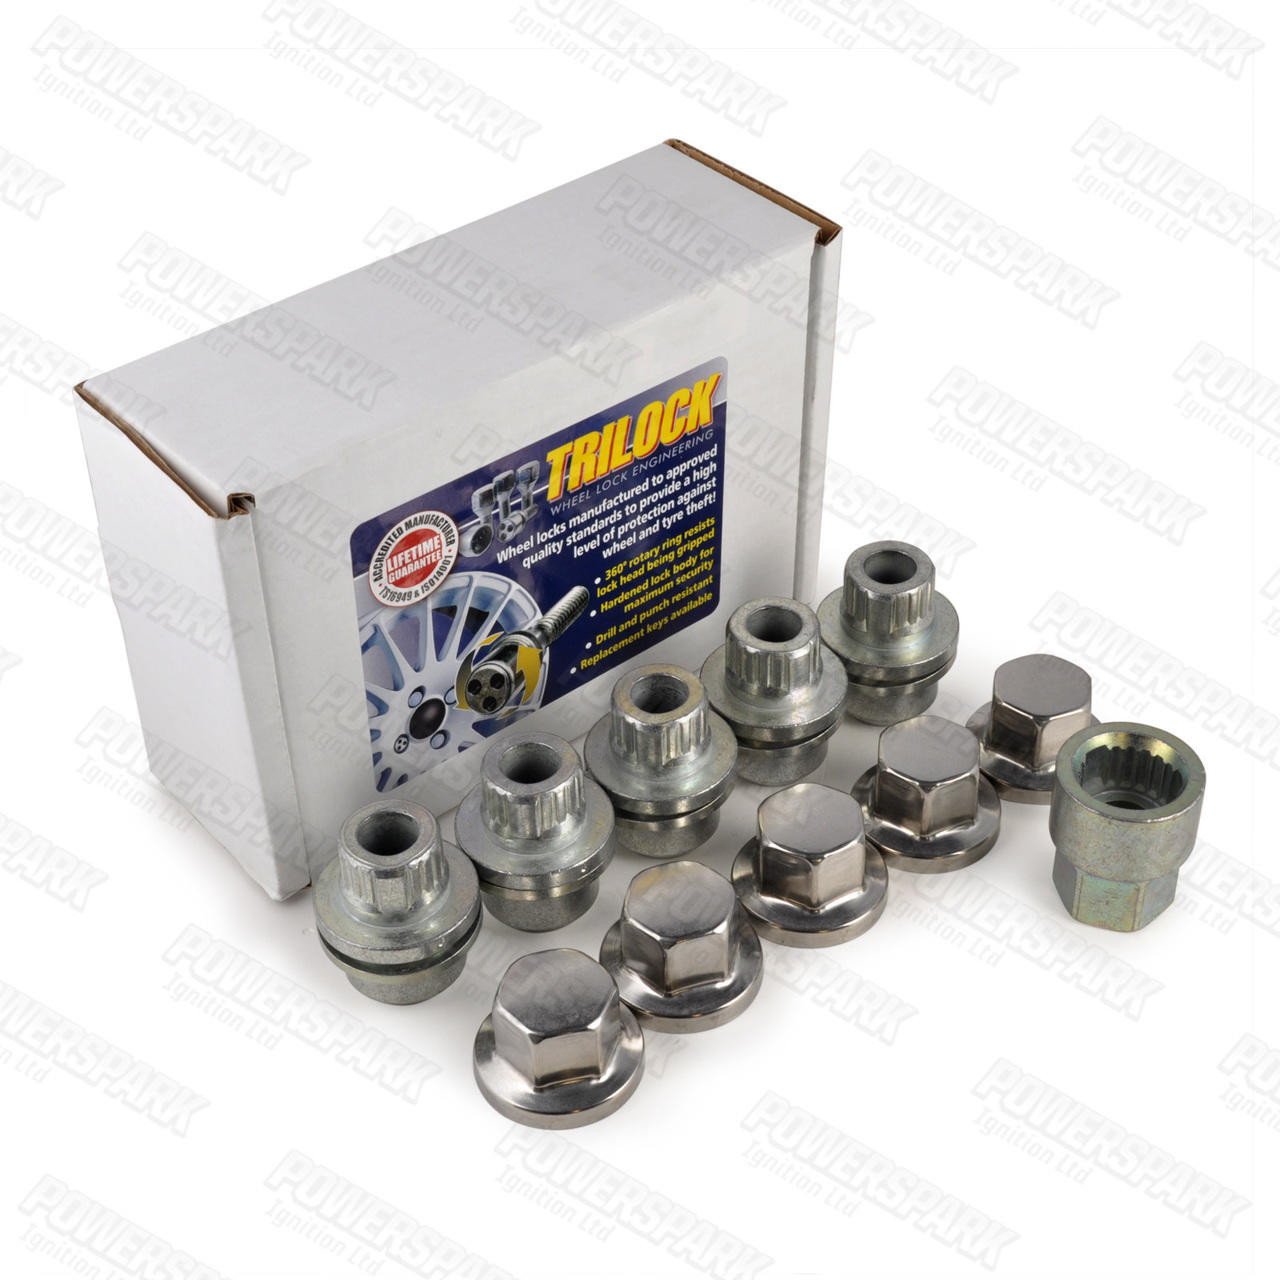 TriLock Trilock Locking Alloy Wheel Nut Set EAFC/C for Land Rover Defender and Discovery 1 and Range Rover Classic